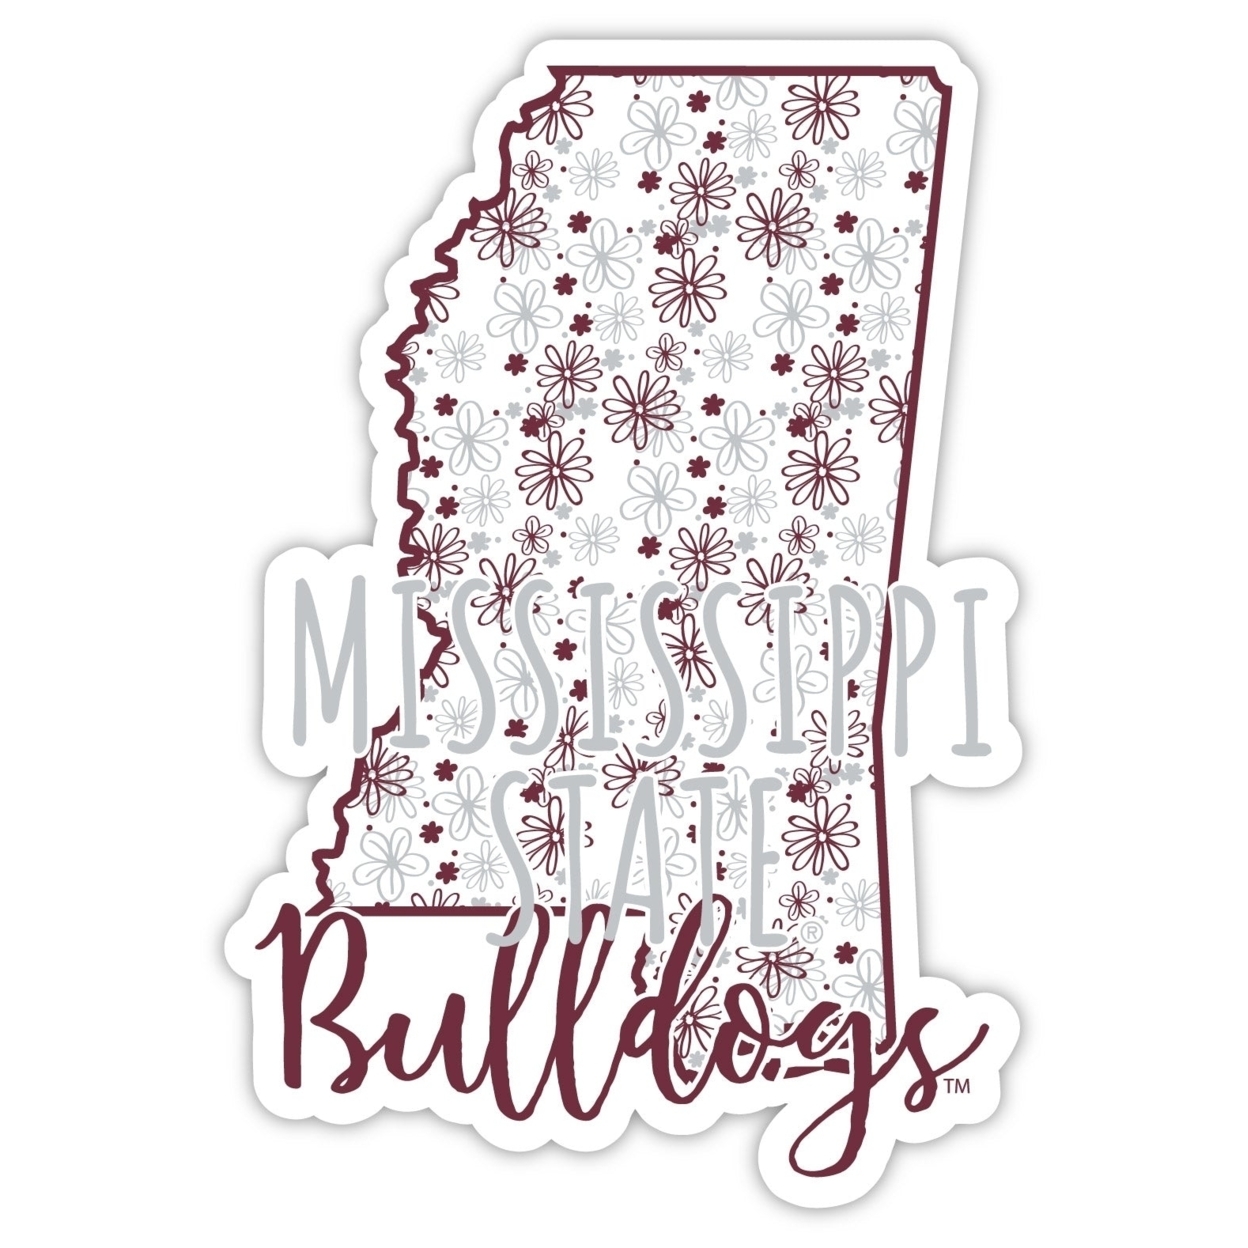 Mississippi State Bulldogs Floral State Die Cut Decal 2-Inch